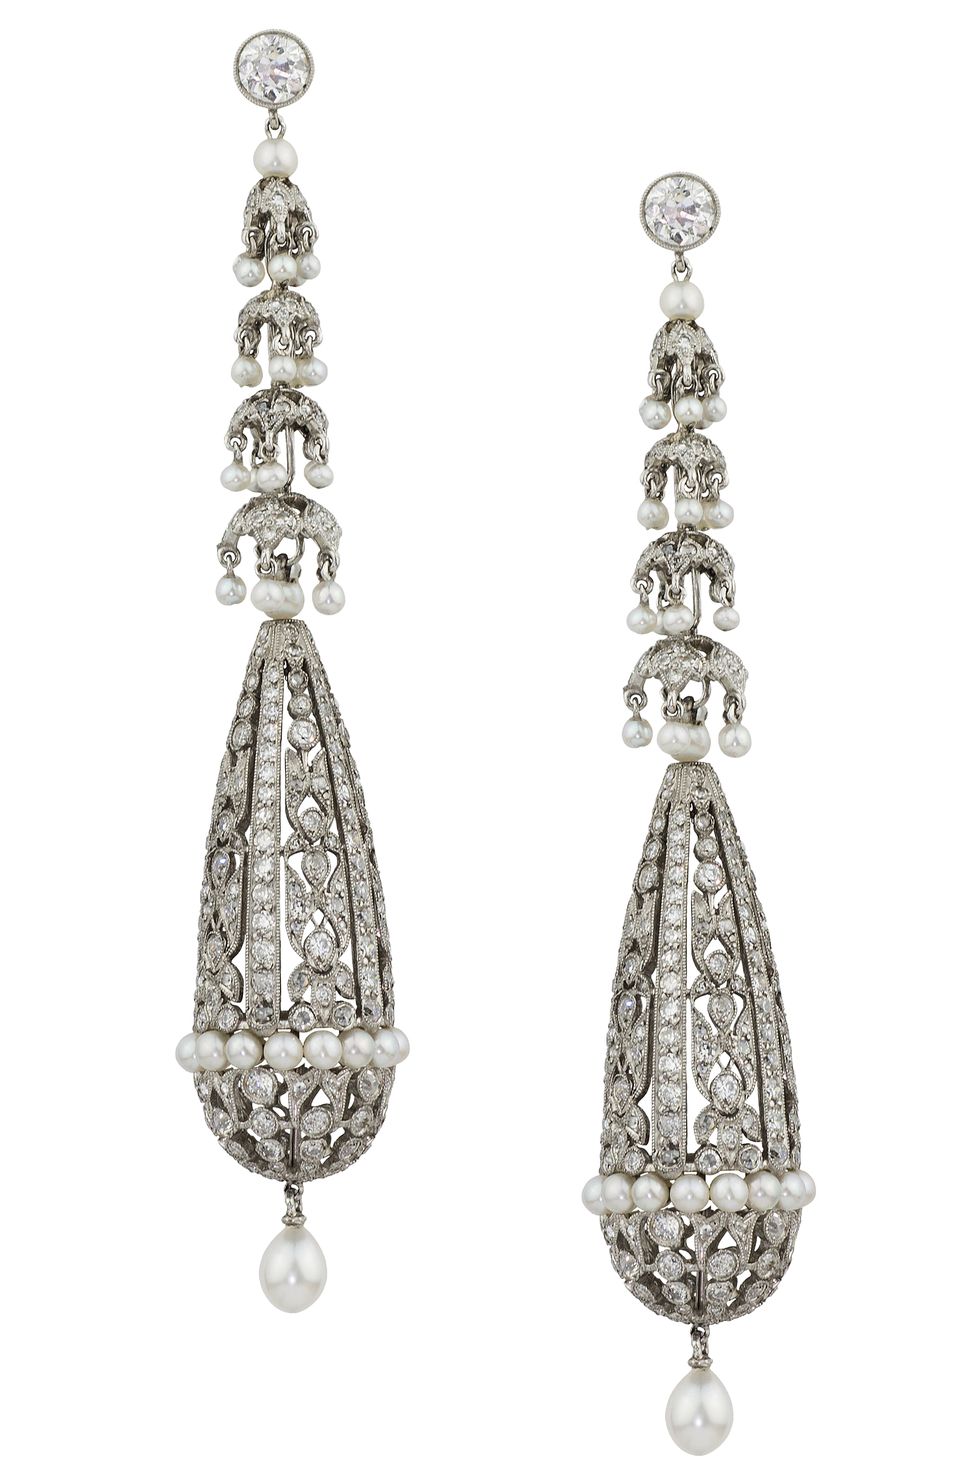 <p>If you lack an heirloom to wear down the aisle but are after something vintage in feel, a piece of estate jewelry with historical significance is the chic way to go about <em>Something Borrowed</em>. </p><p><br></p><p><em><strong>Stephen Russell </strong>diamond and pearl earrings</em><em>, price upon request, <a href="http://stephenrussell.com/" target="_blank">stephenrussell.com</a></em>.</p>